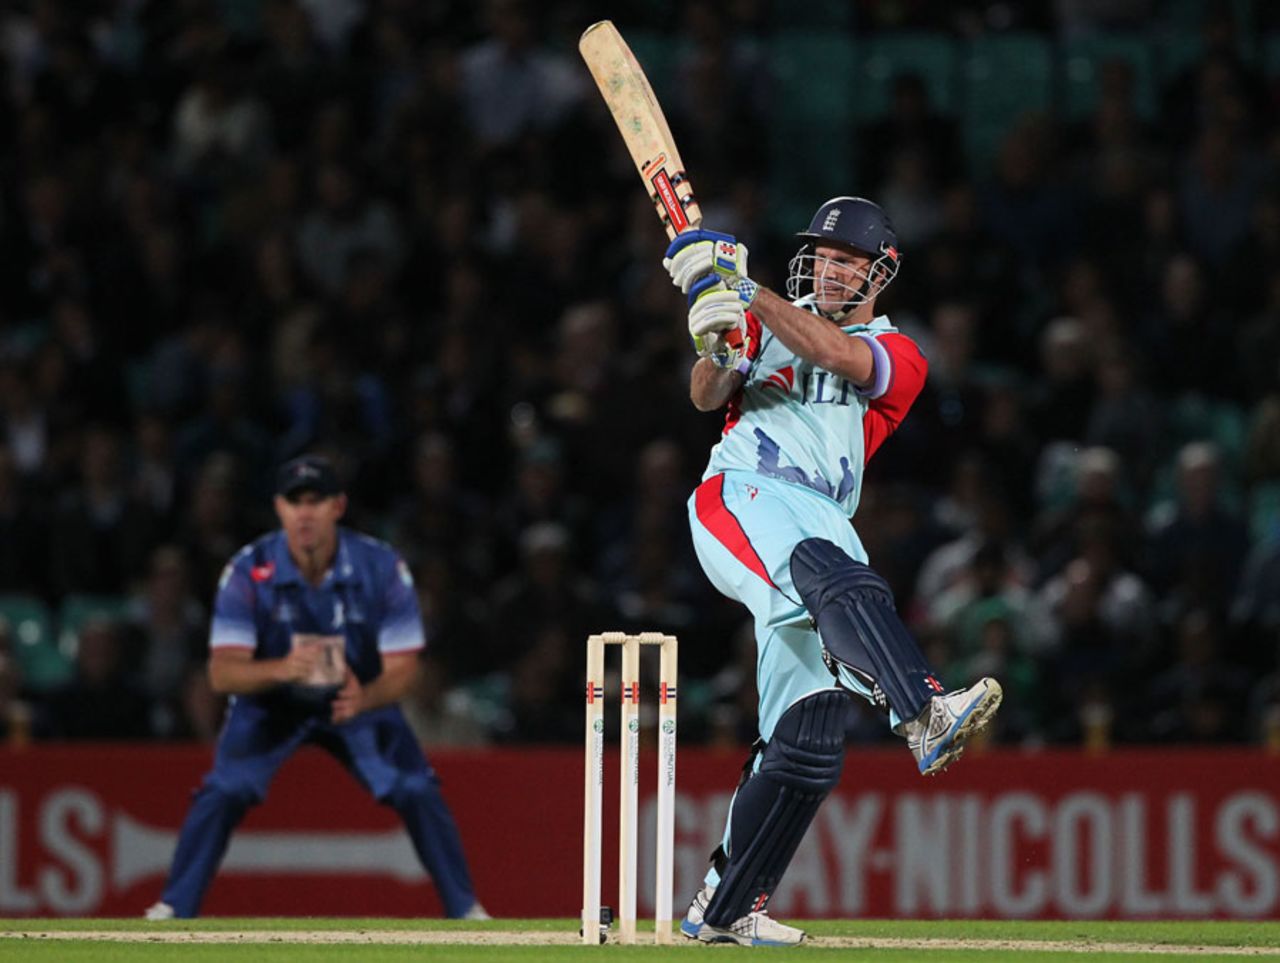 Help for Heroes captain Andrew Strauss in action during the Cricket for Heroes charity match, London, September 17, 2015